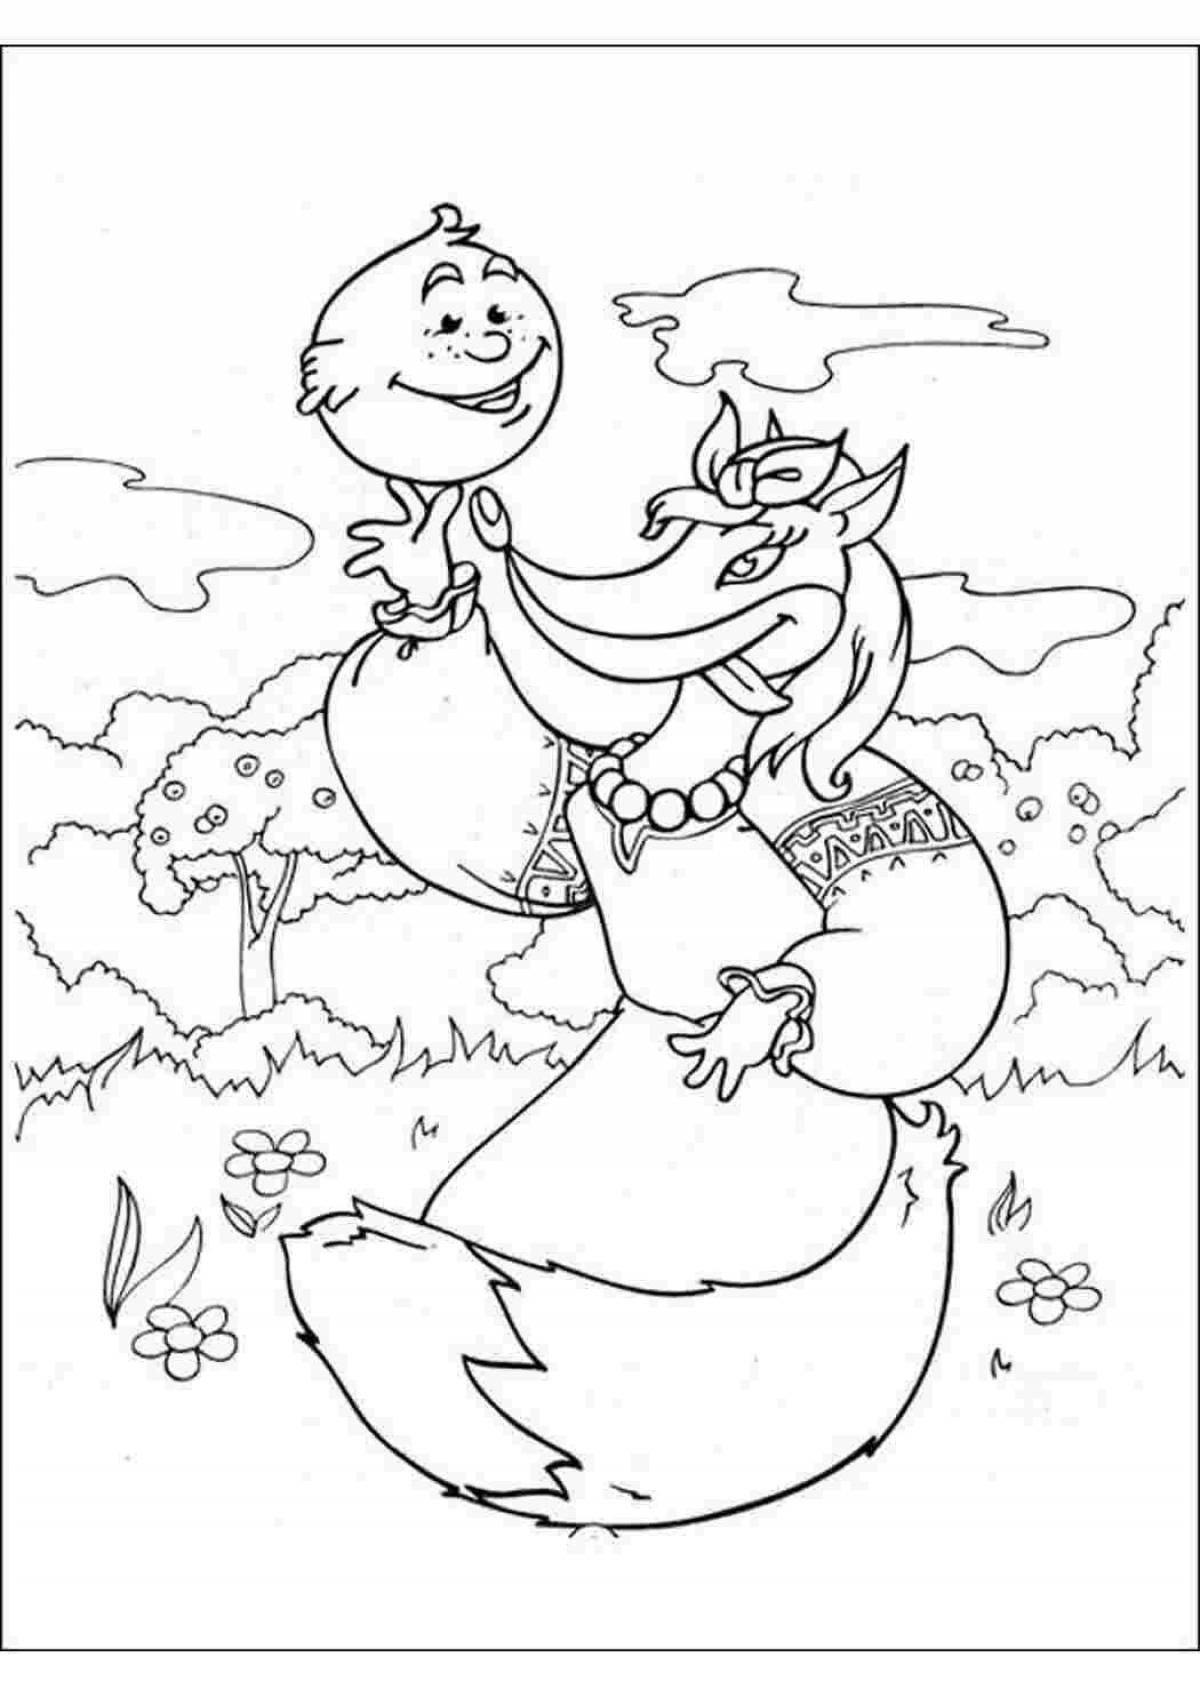 Great fox and rabbit coloring book